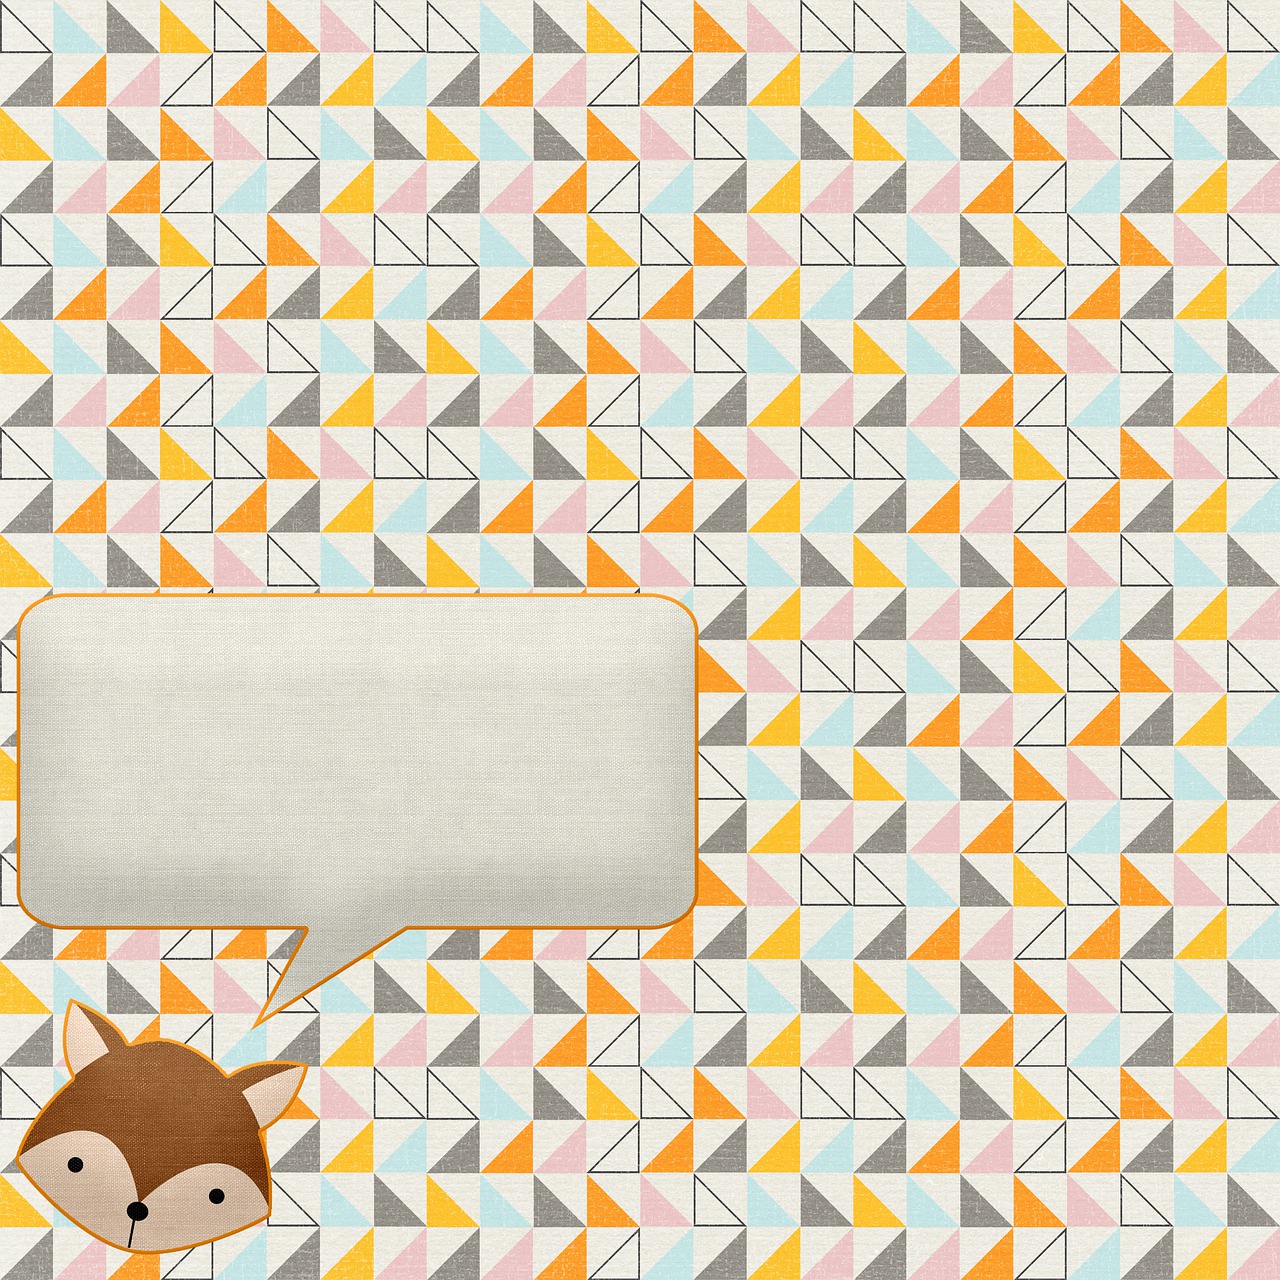 a picture of a fox with a speech bubble, a picture, inspired by Kubisi art, conceptual art, wallpaper pattern, quilt, triangle, vintage - w 1 0 2 4